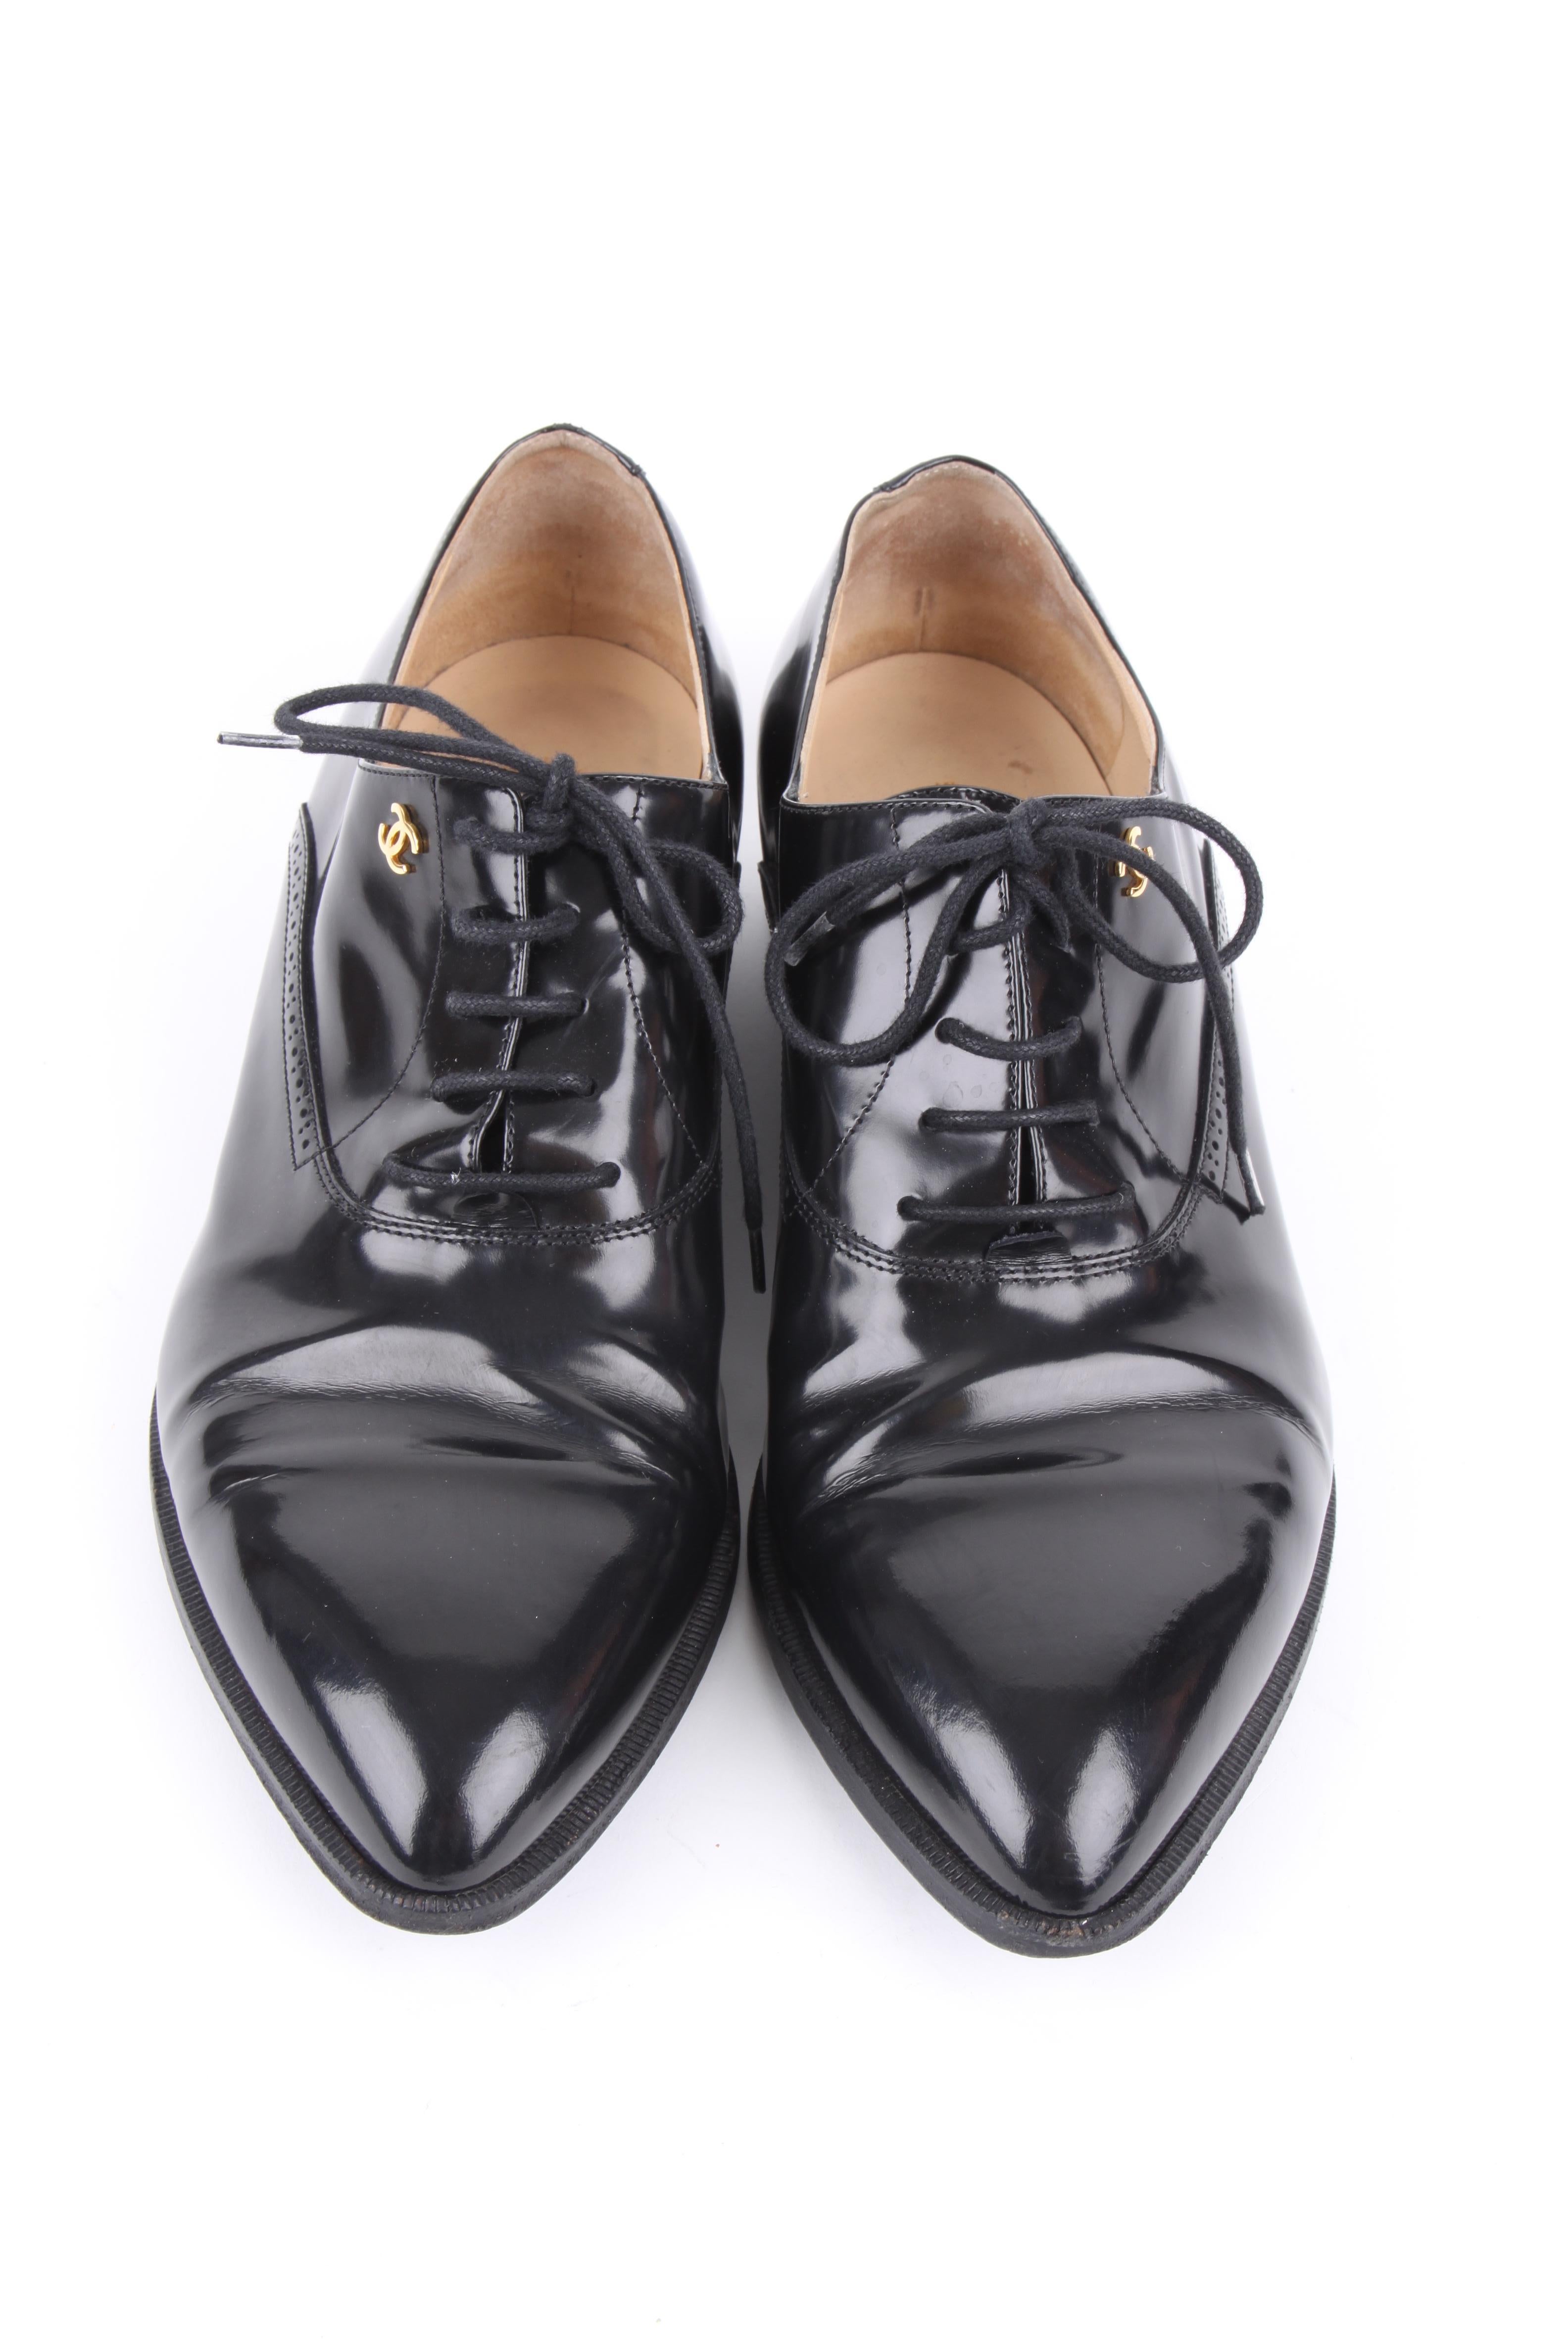 Chanel black patent leather CC logo pointed-toe loafers.

These loafers have a traditional, classic design, which is accented by the lovely smooth and shiny polished patent leather and the embossed CC Chanel logo so you will never have to bother